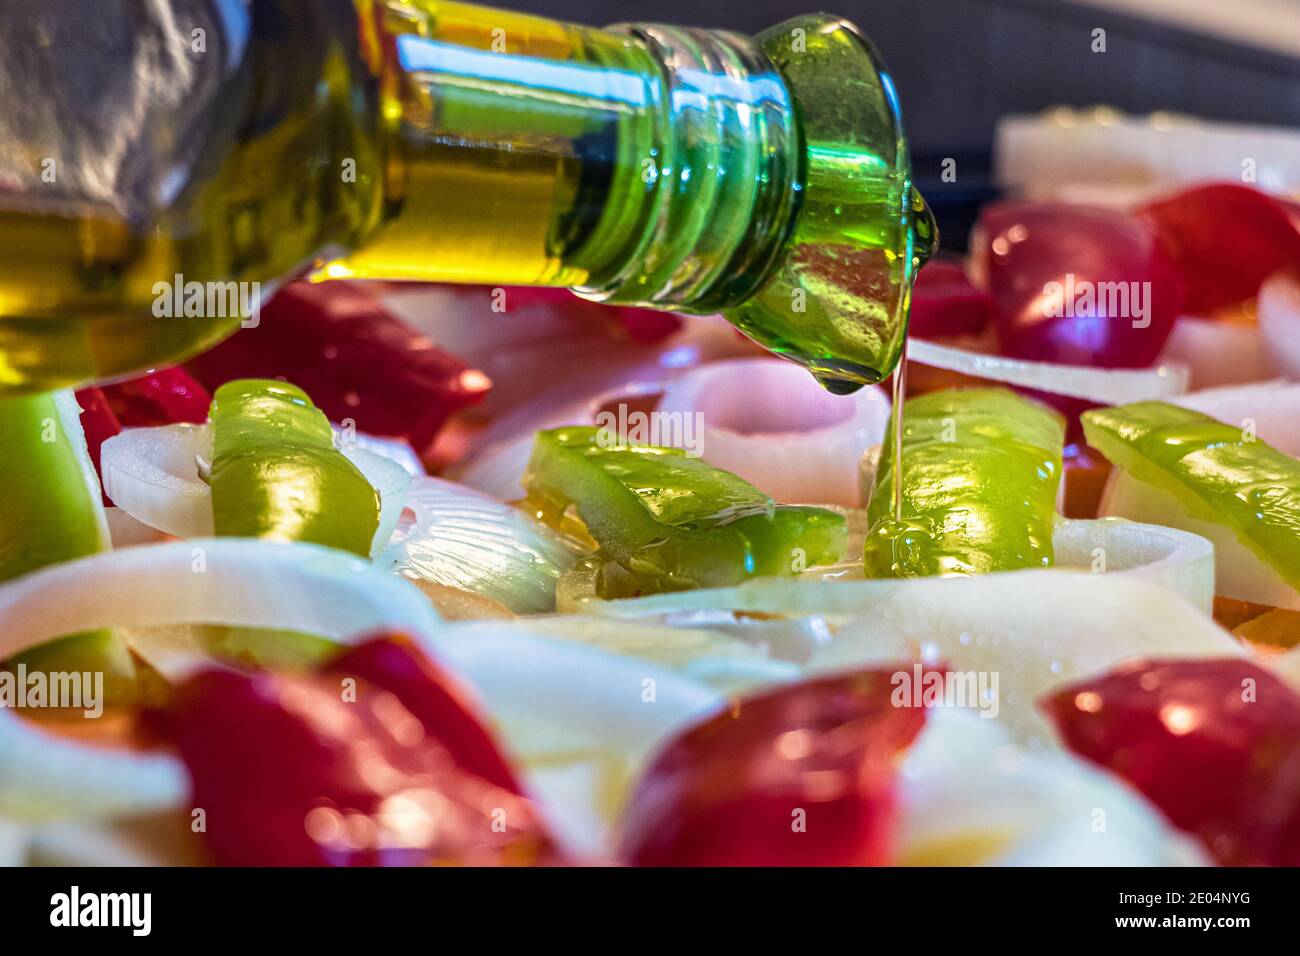 Close up of bottle pouring olive oil on raw chopped vegetables placed on a oven tray Stock Photo